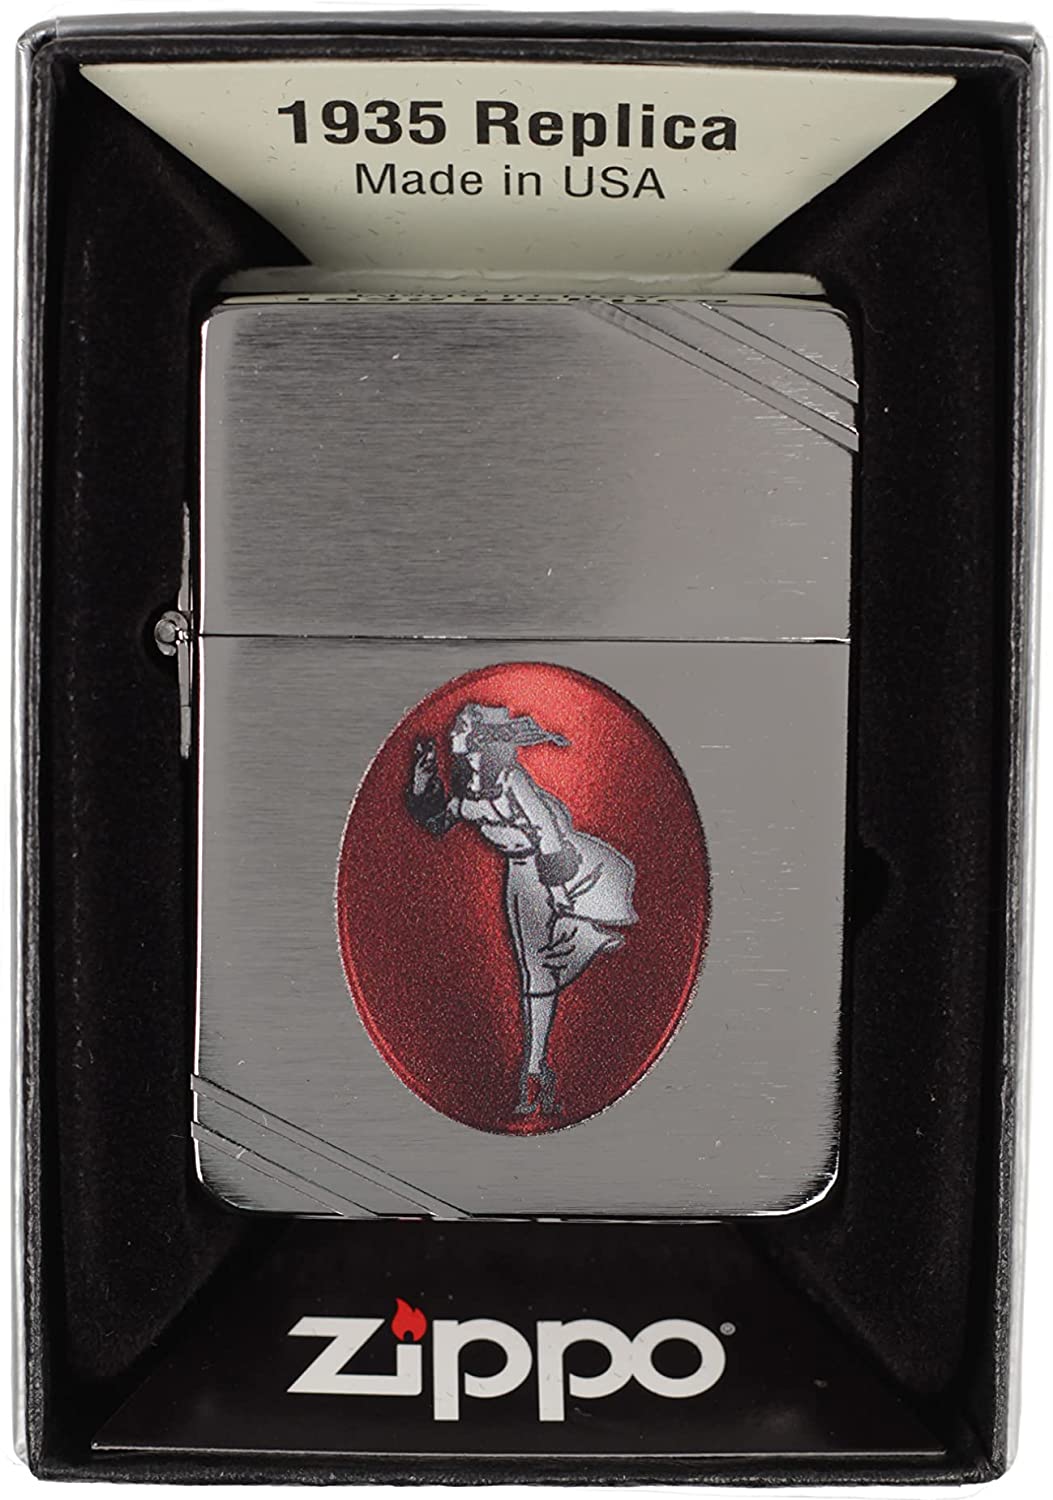 Windy Classic Girl - 1935 Replica Brushed Chrome with Slashes Zippo Lighter